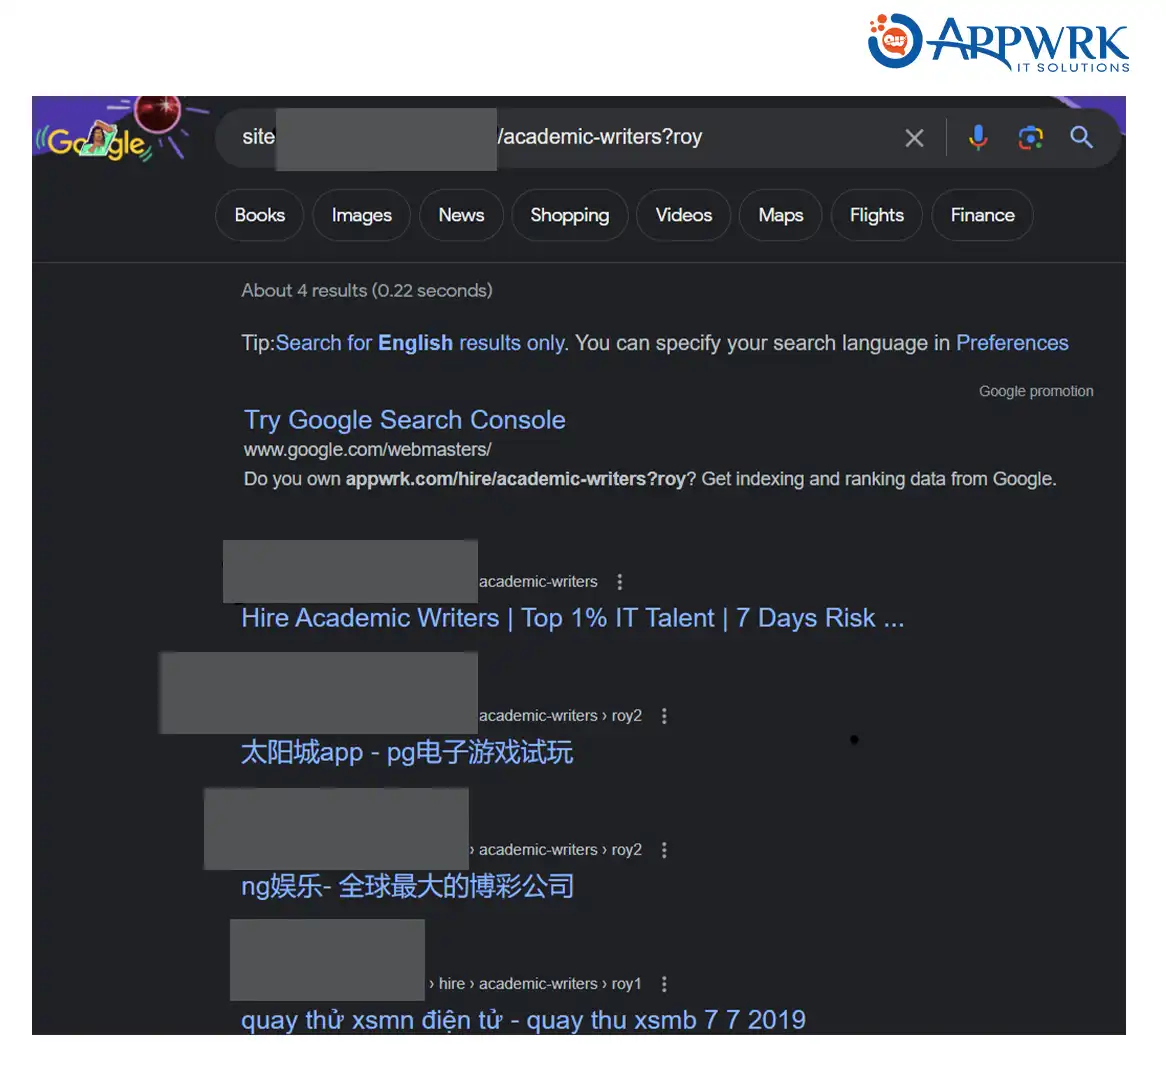 Japanese SEO Spam Attack on the Website